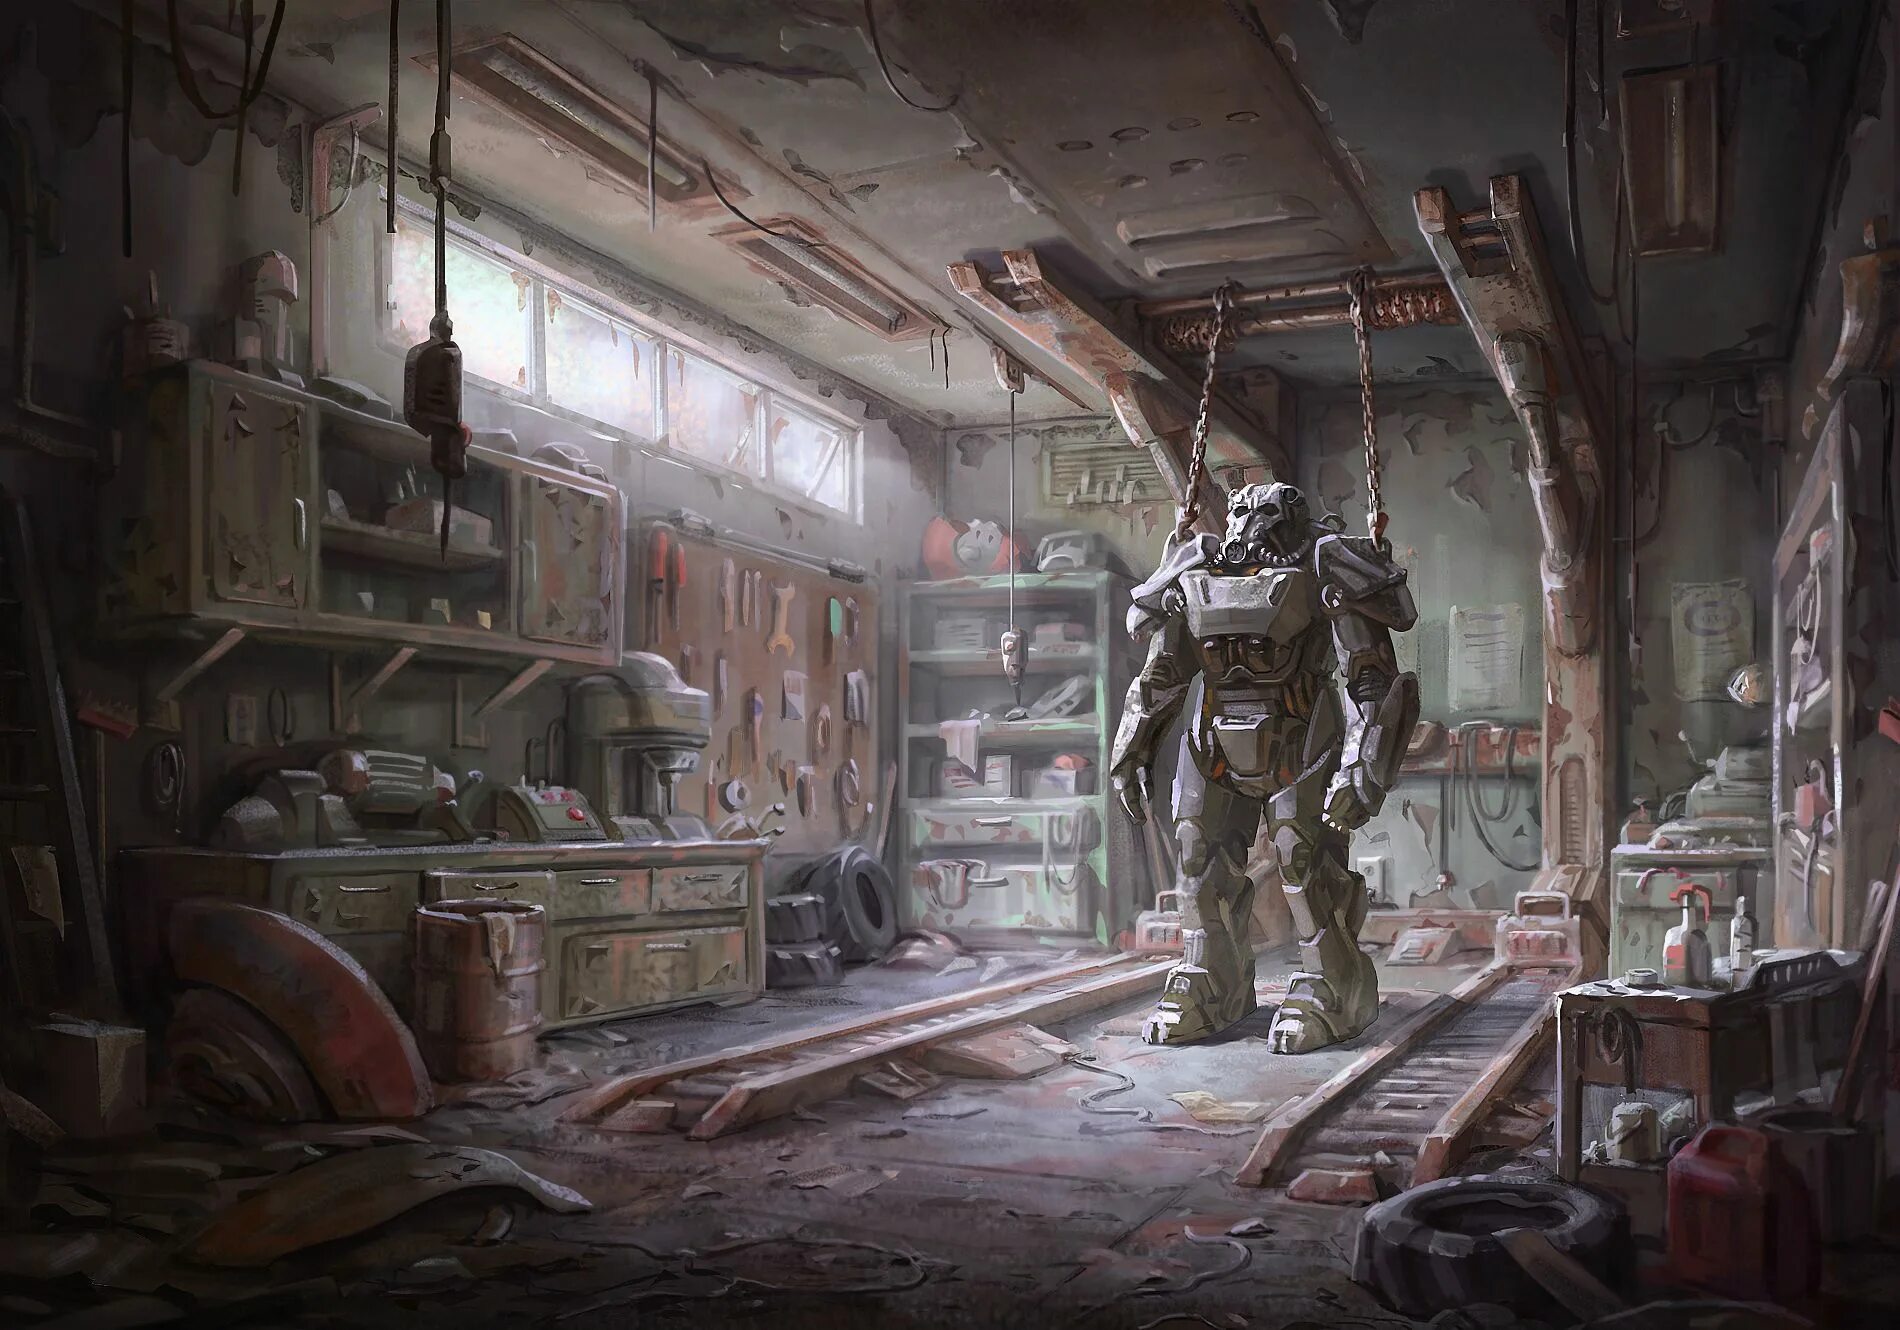 Фоллаут мастерские. Fallout 4 Art. Fallout 4 концепт арт. Fallout 4 концепты. Fallout 4 Official Art.